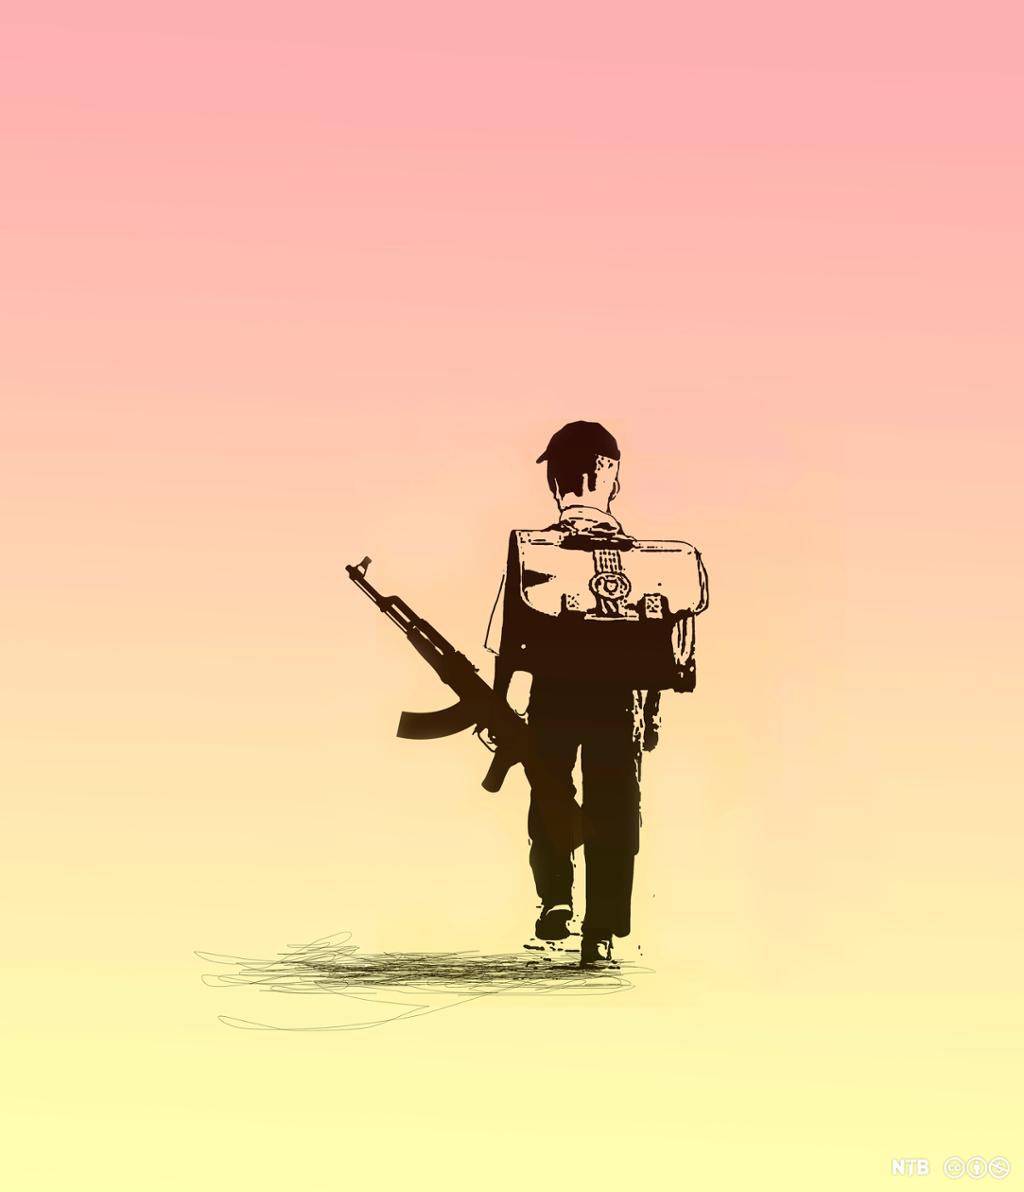 A small child with a big packpack carrying a machine gun. They are walking away from the viewer. The background is pink and yellow. The mood is sad/sombre. Illustration.